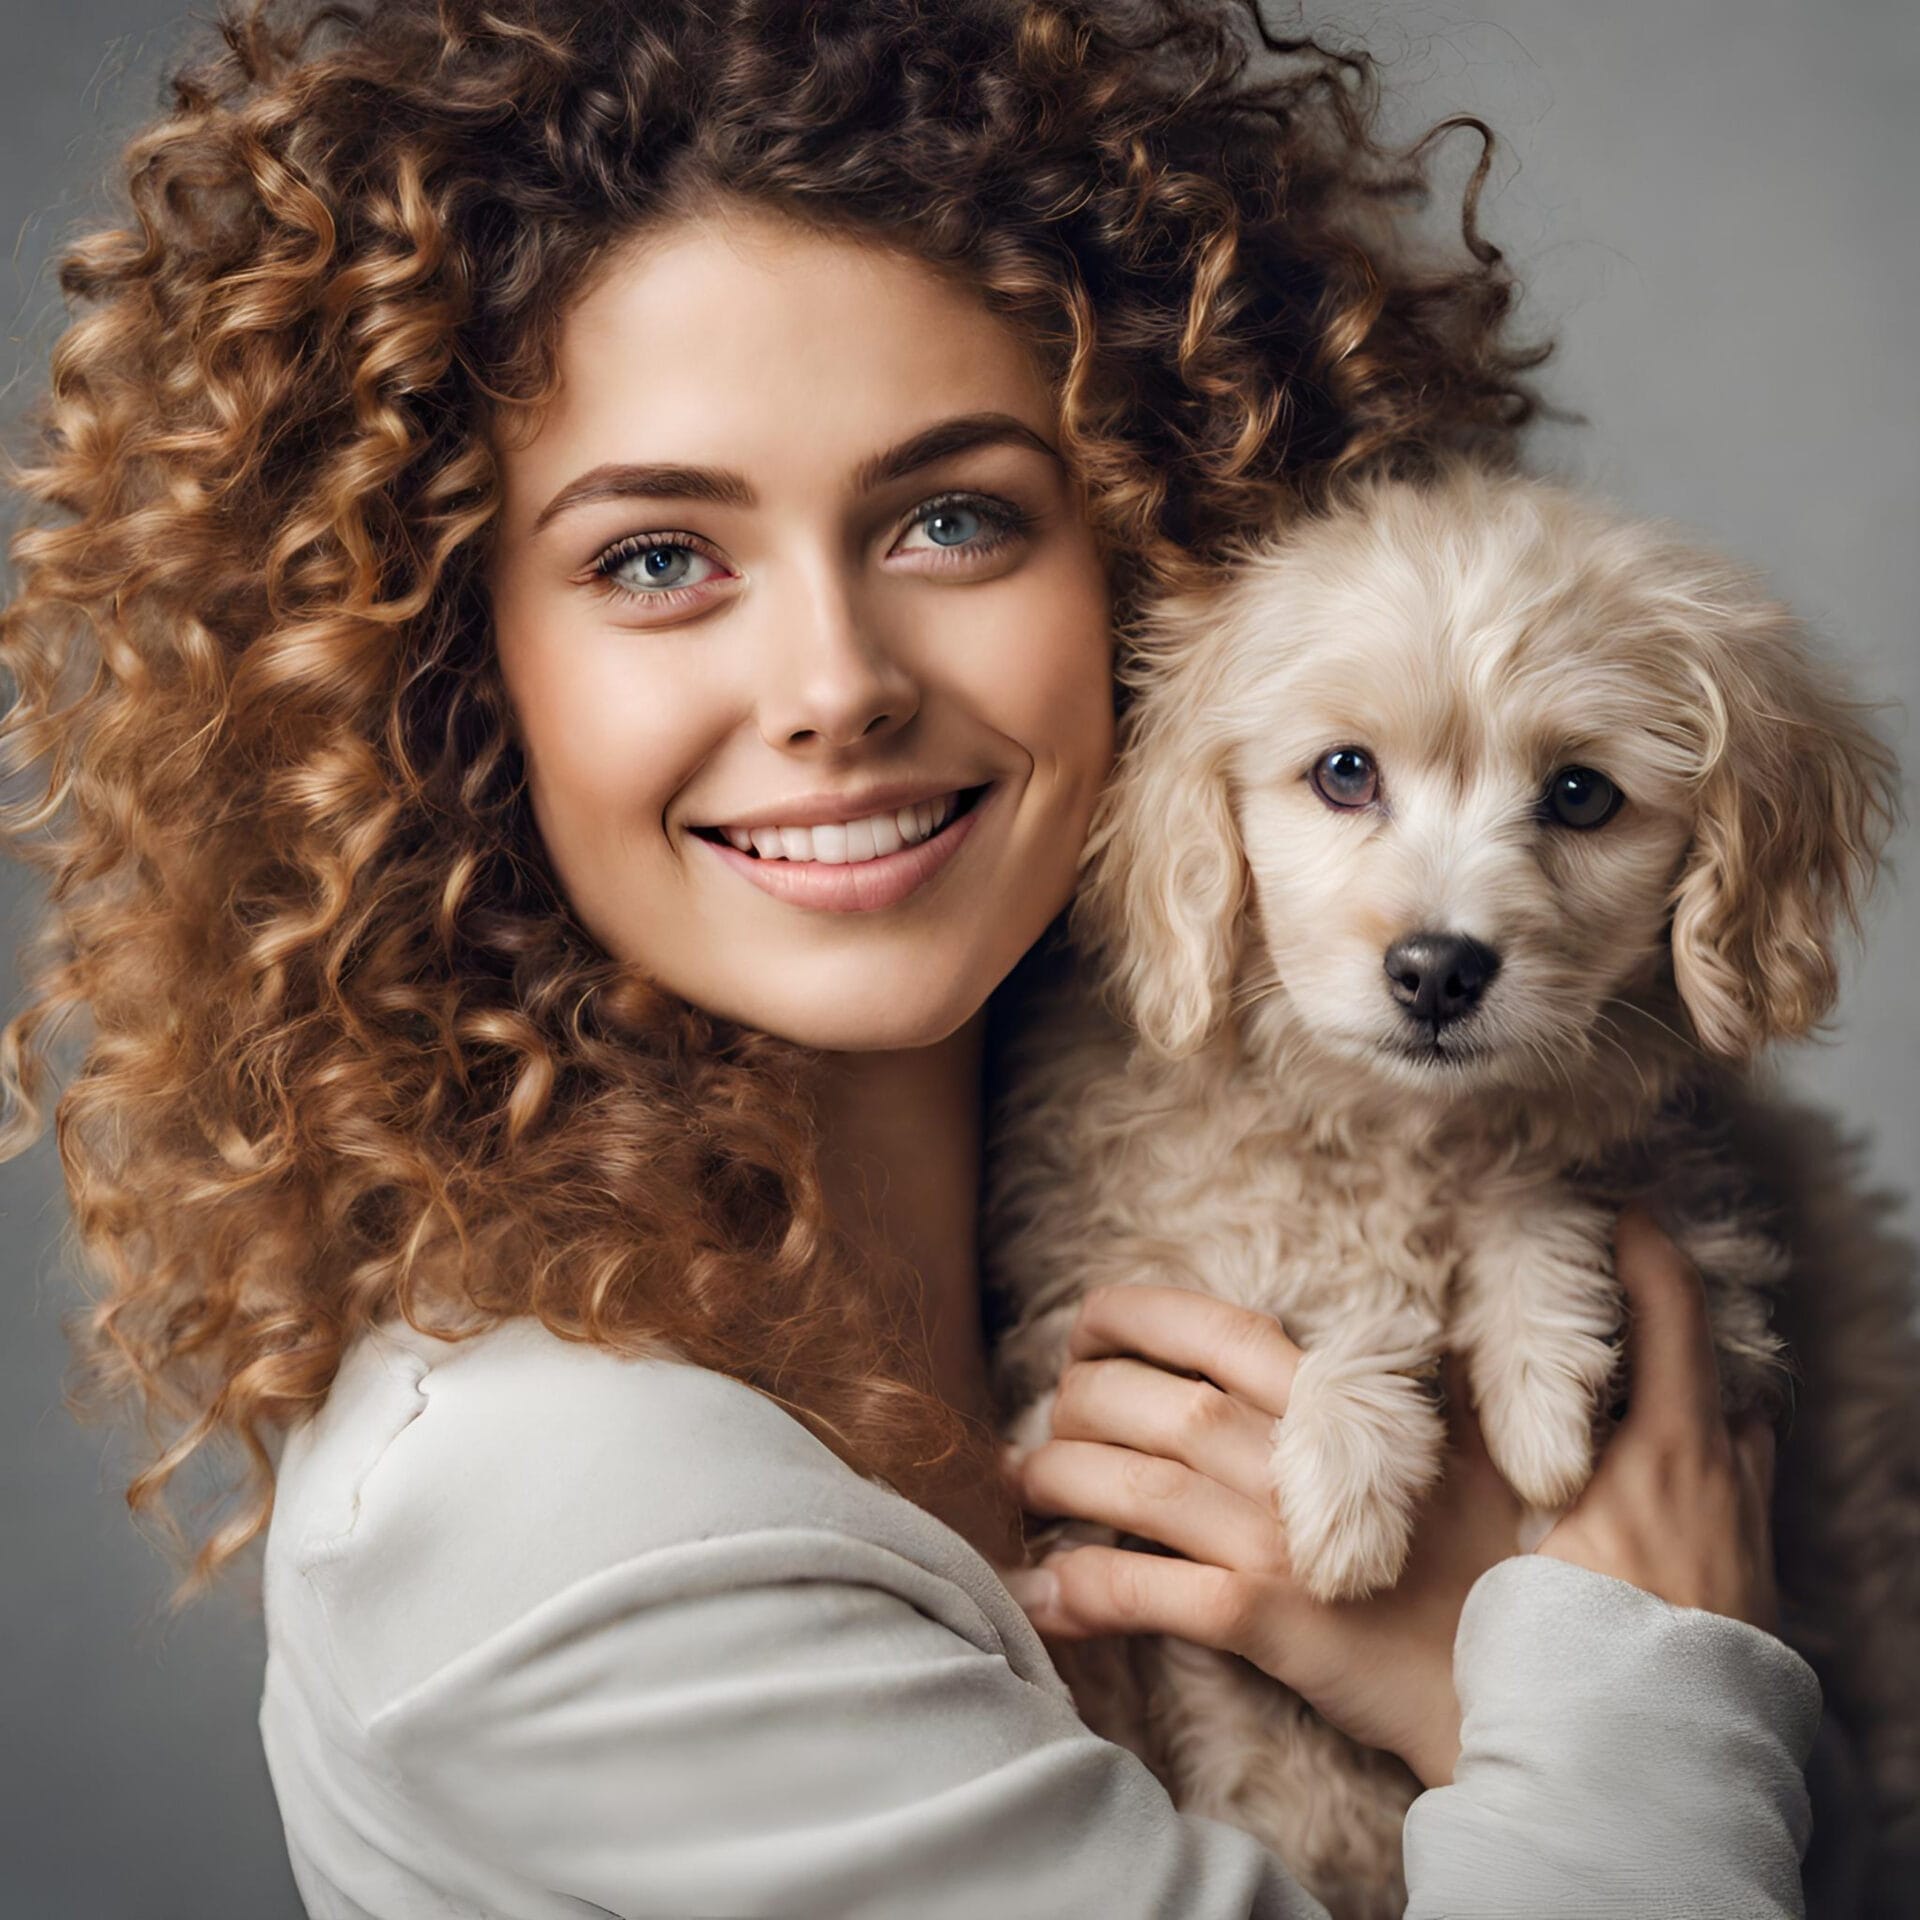 Does your Pet Like Your Curly Hair